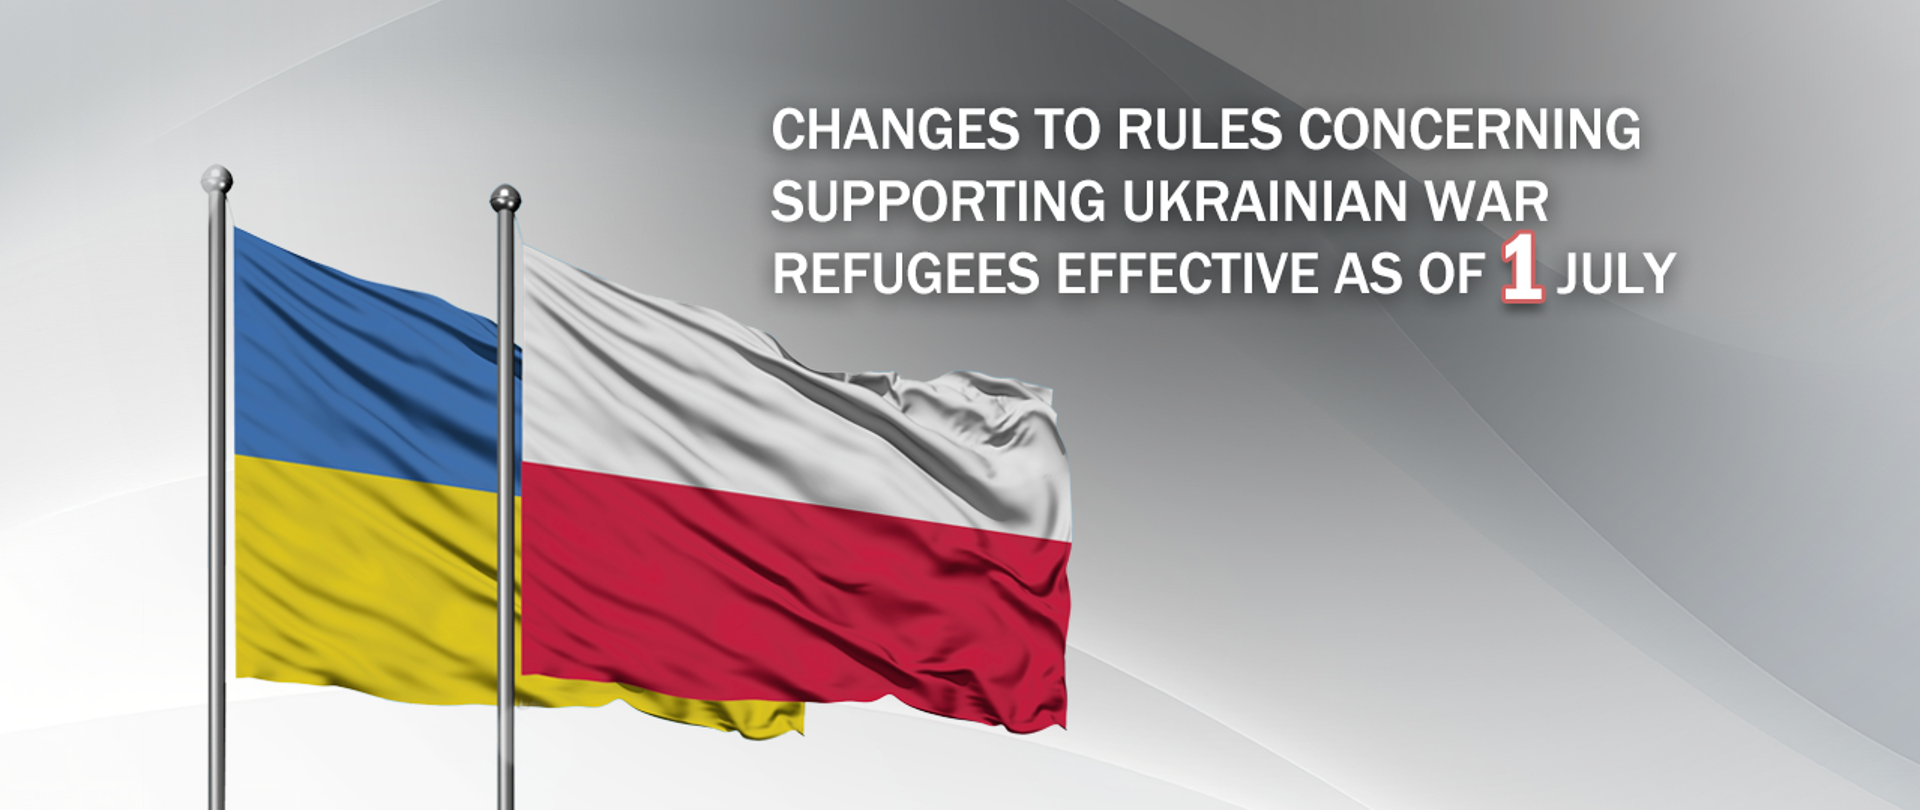 Changes to rules concerning supporting Ukrainian war refugees effective as of 1 July